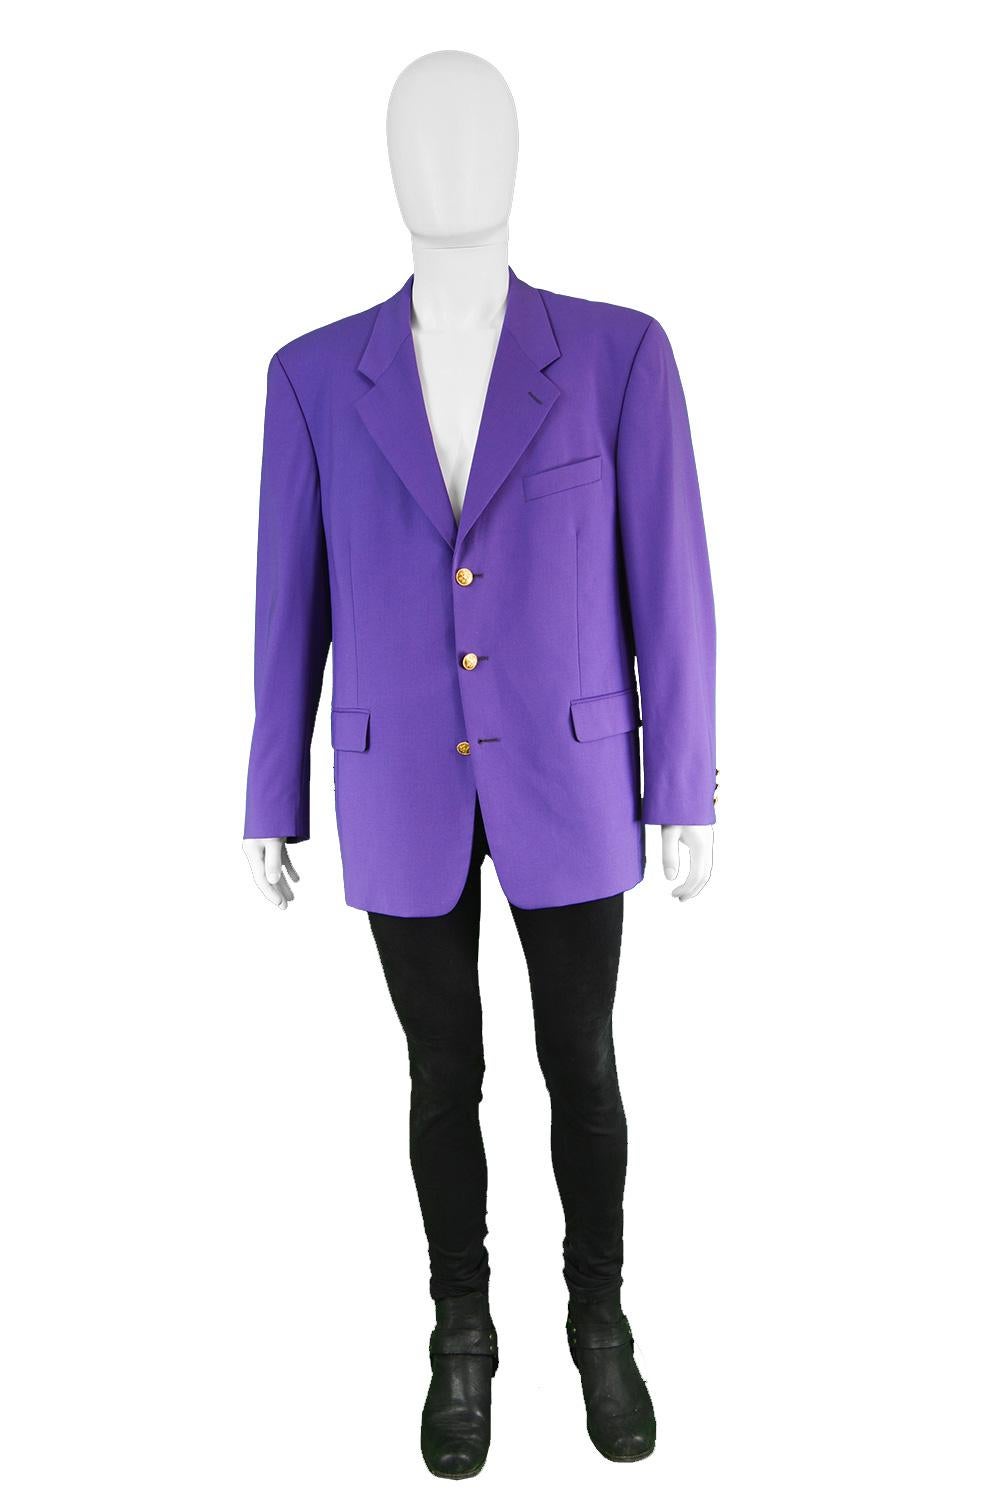 Kenzo Vintage Men's Bright Purple Pure Worsted Wool Blazer Jacket, 1980s

Size: Marked FR 52 which is roughly a men's Large. Please check measurements.
Chest - 44”  / 112cm (Allow a couple of inches room for movement)
Waist - 42” / 106cm
Length